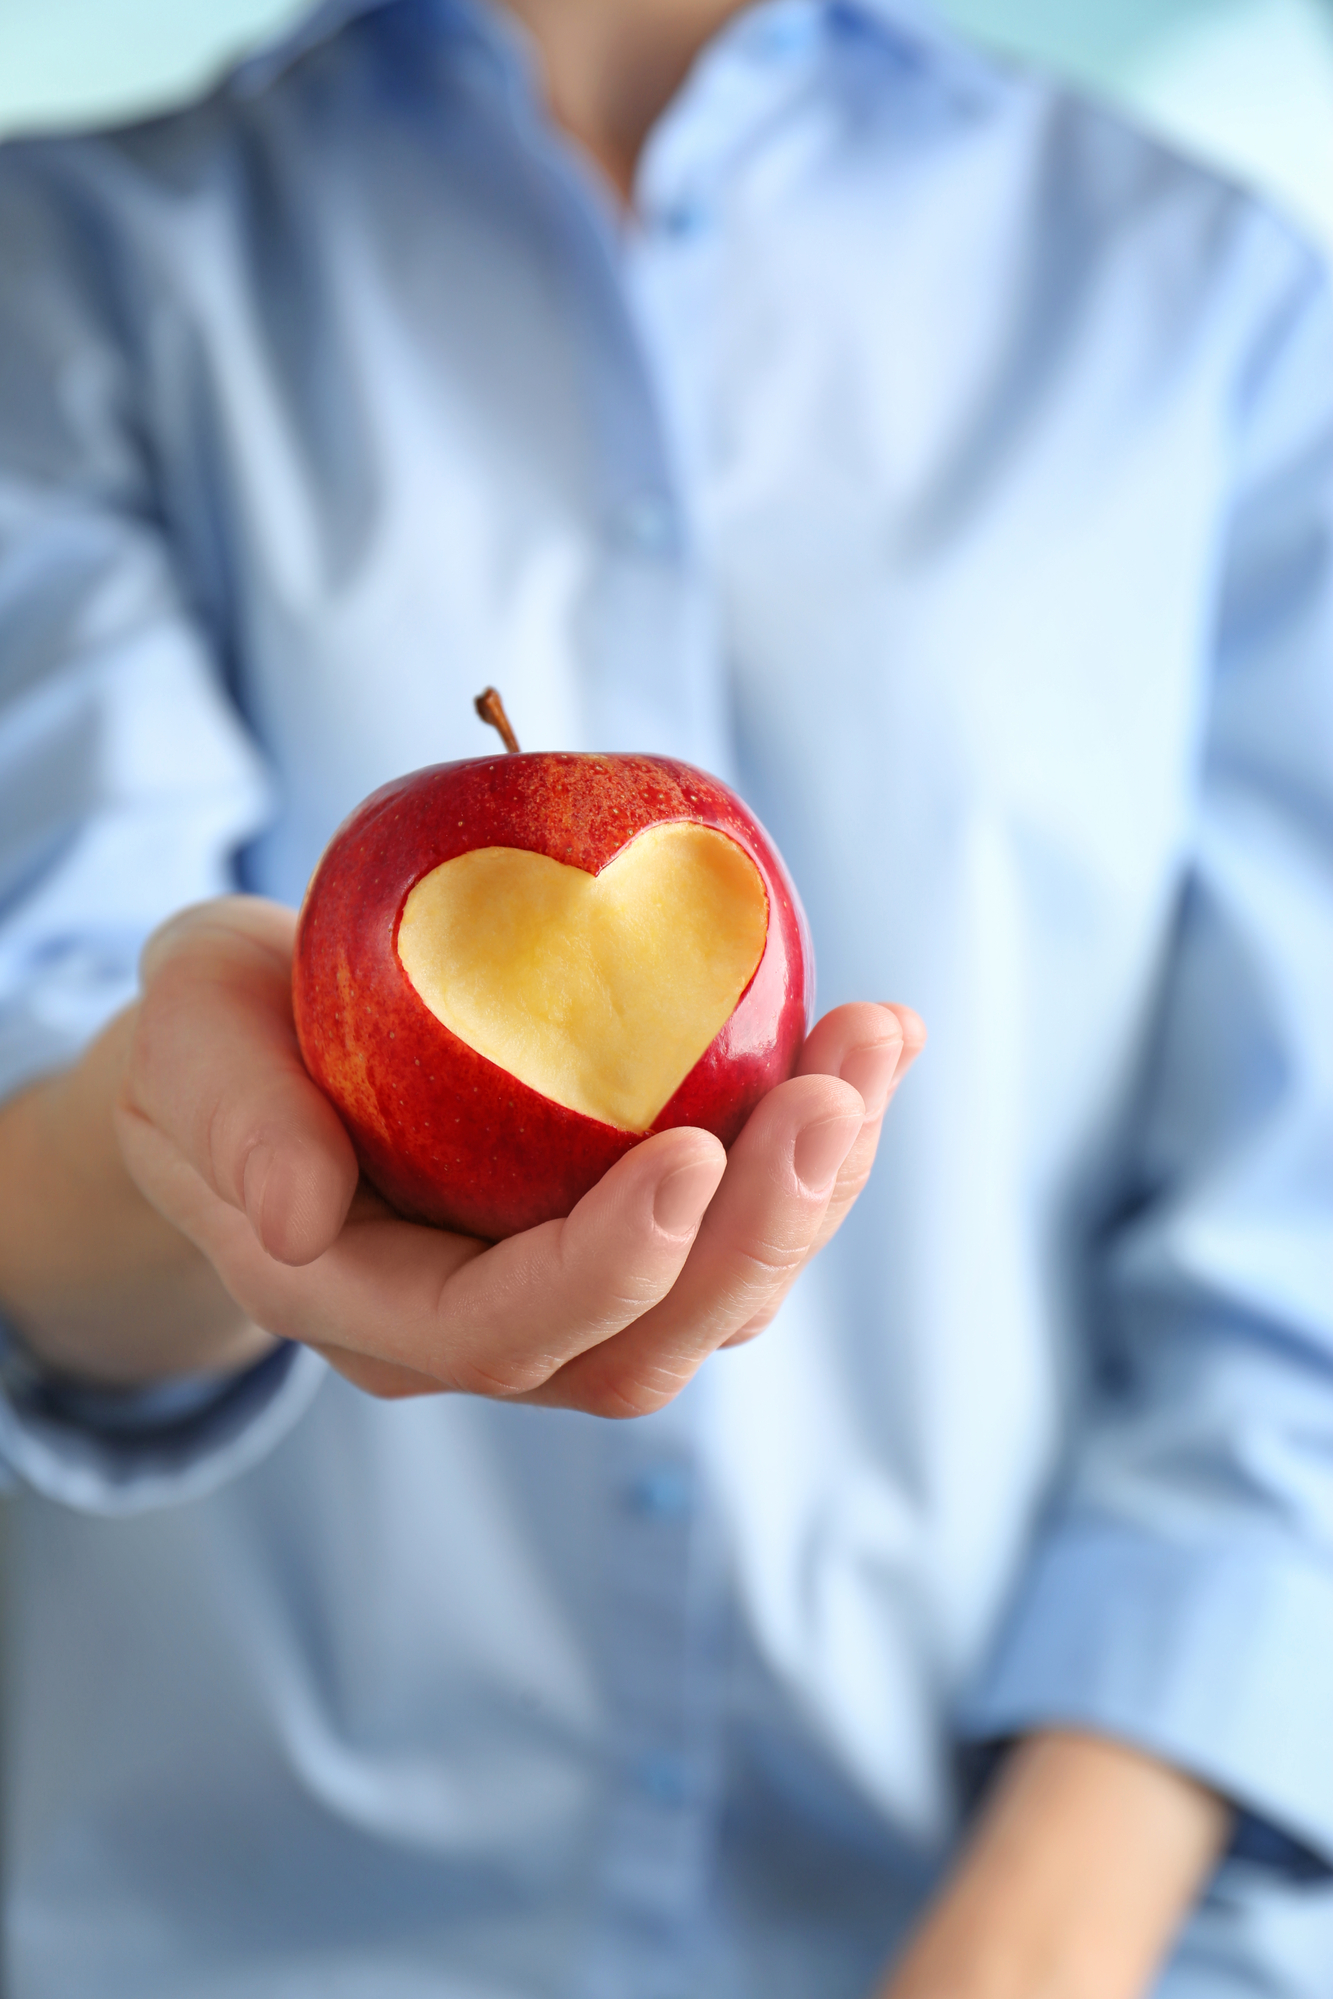 Apple with heart-shaped cut out